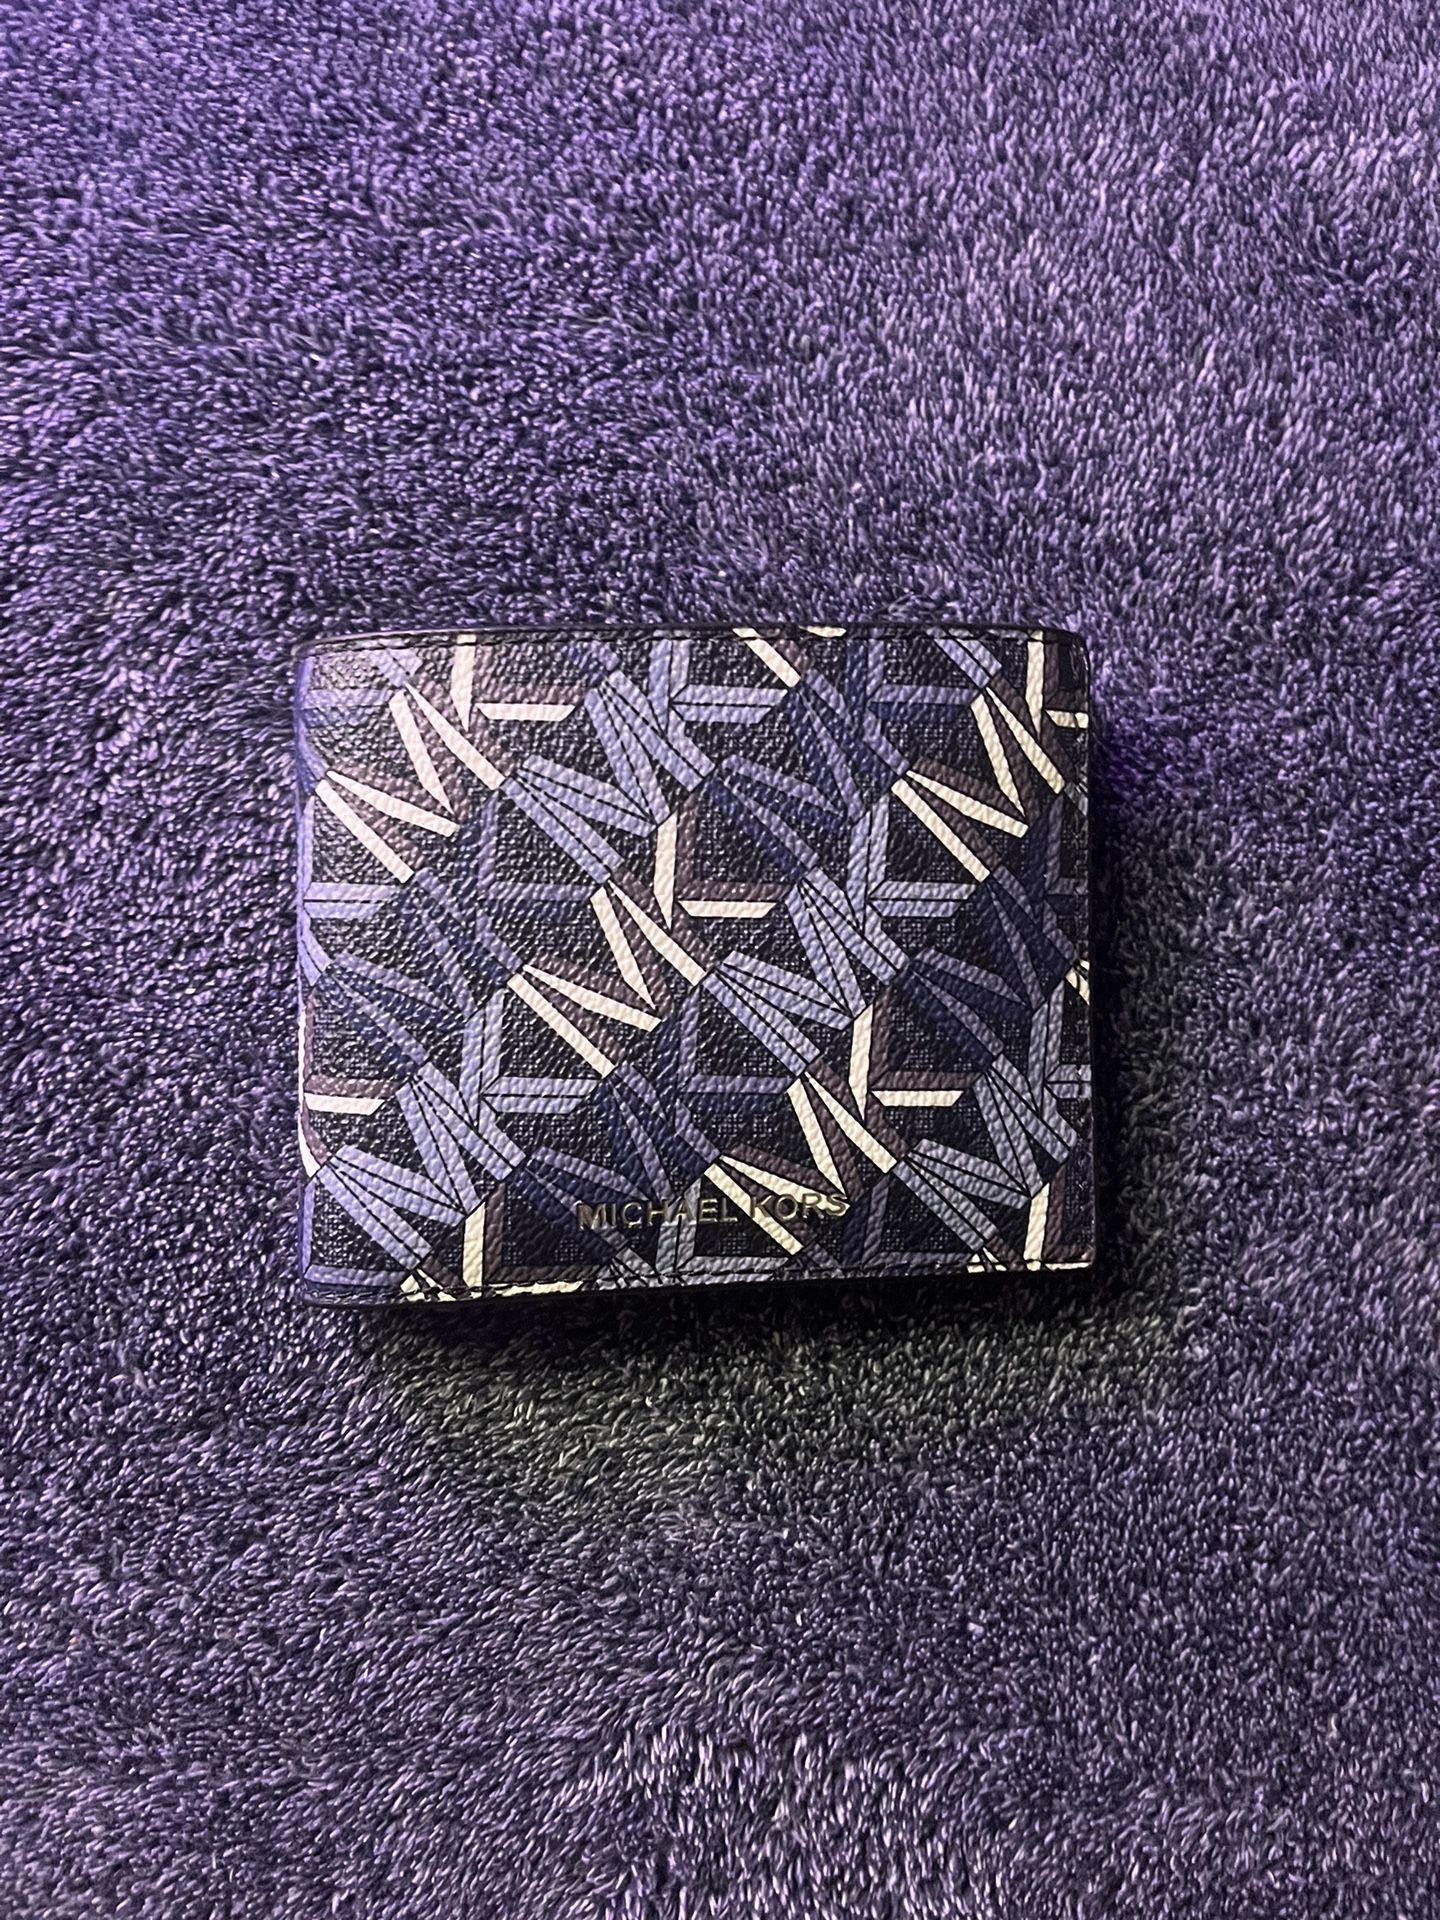 Michael Kors Wallet - Nearly Brand New Condition!